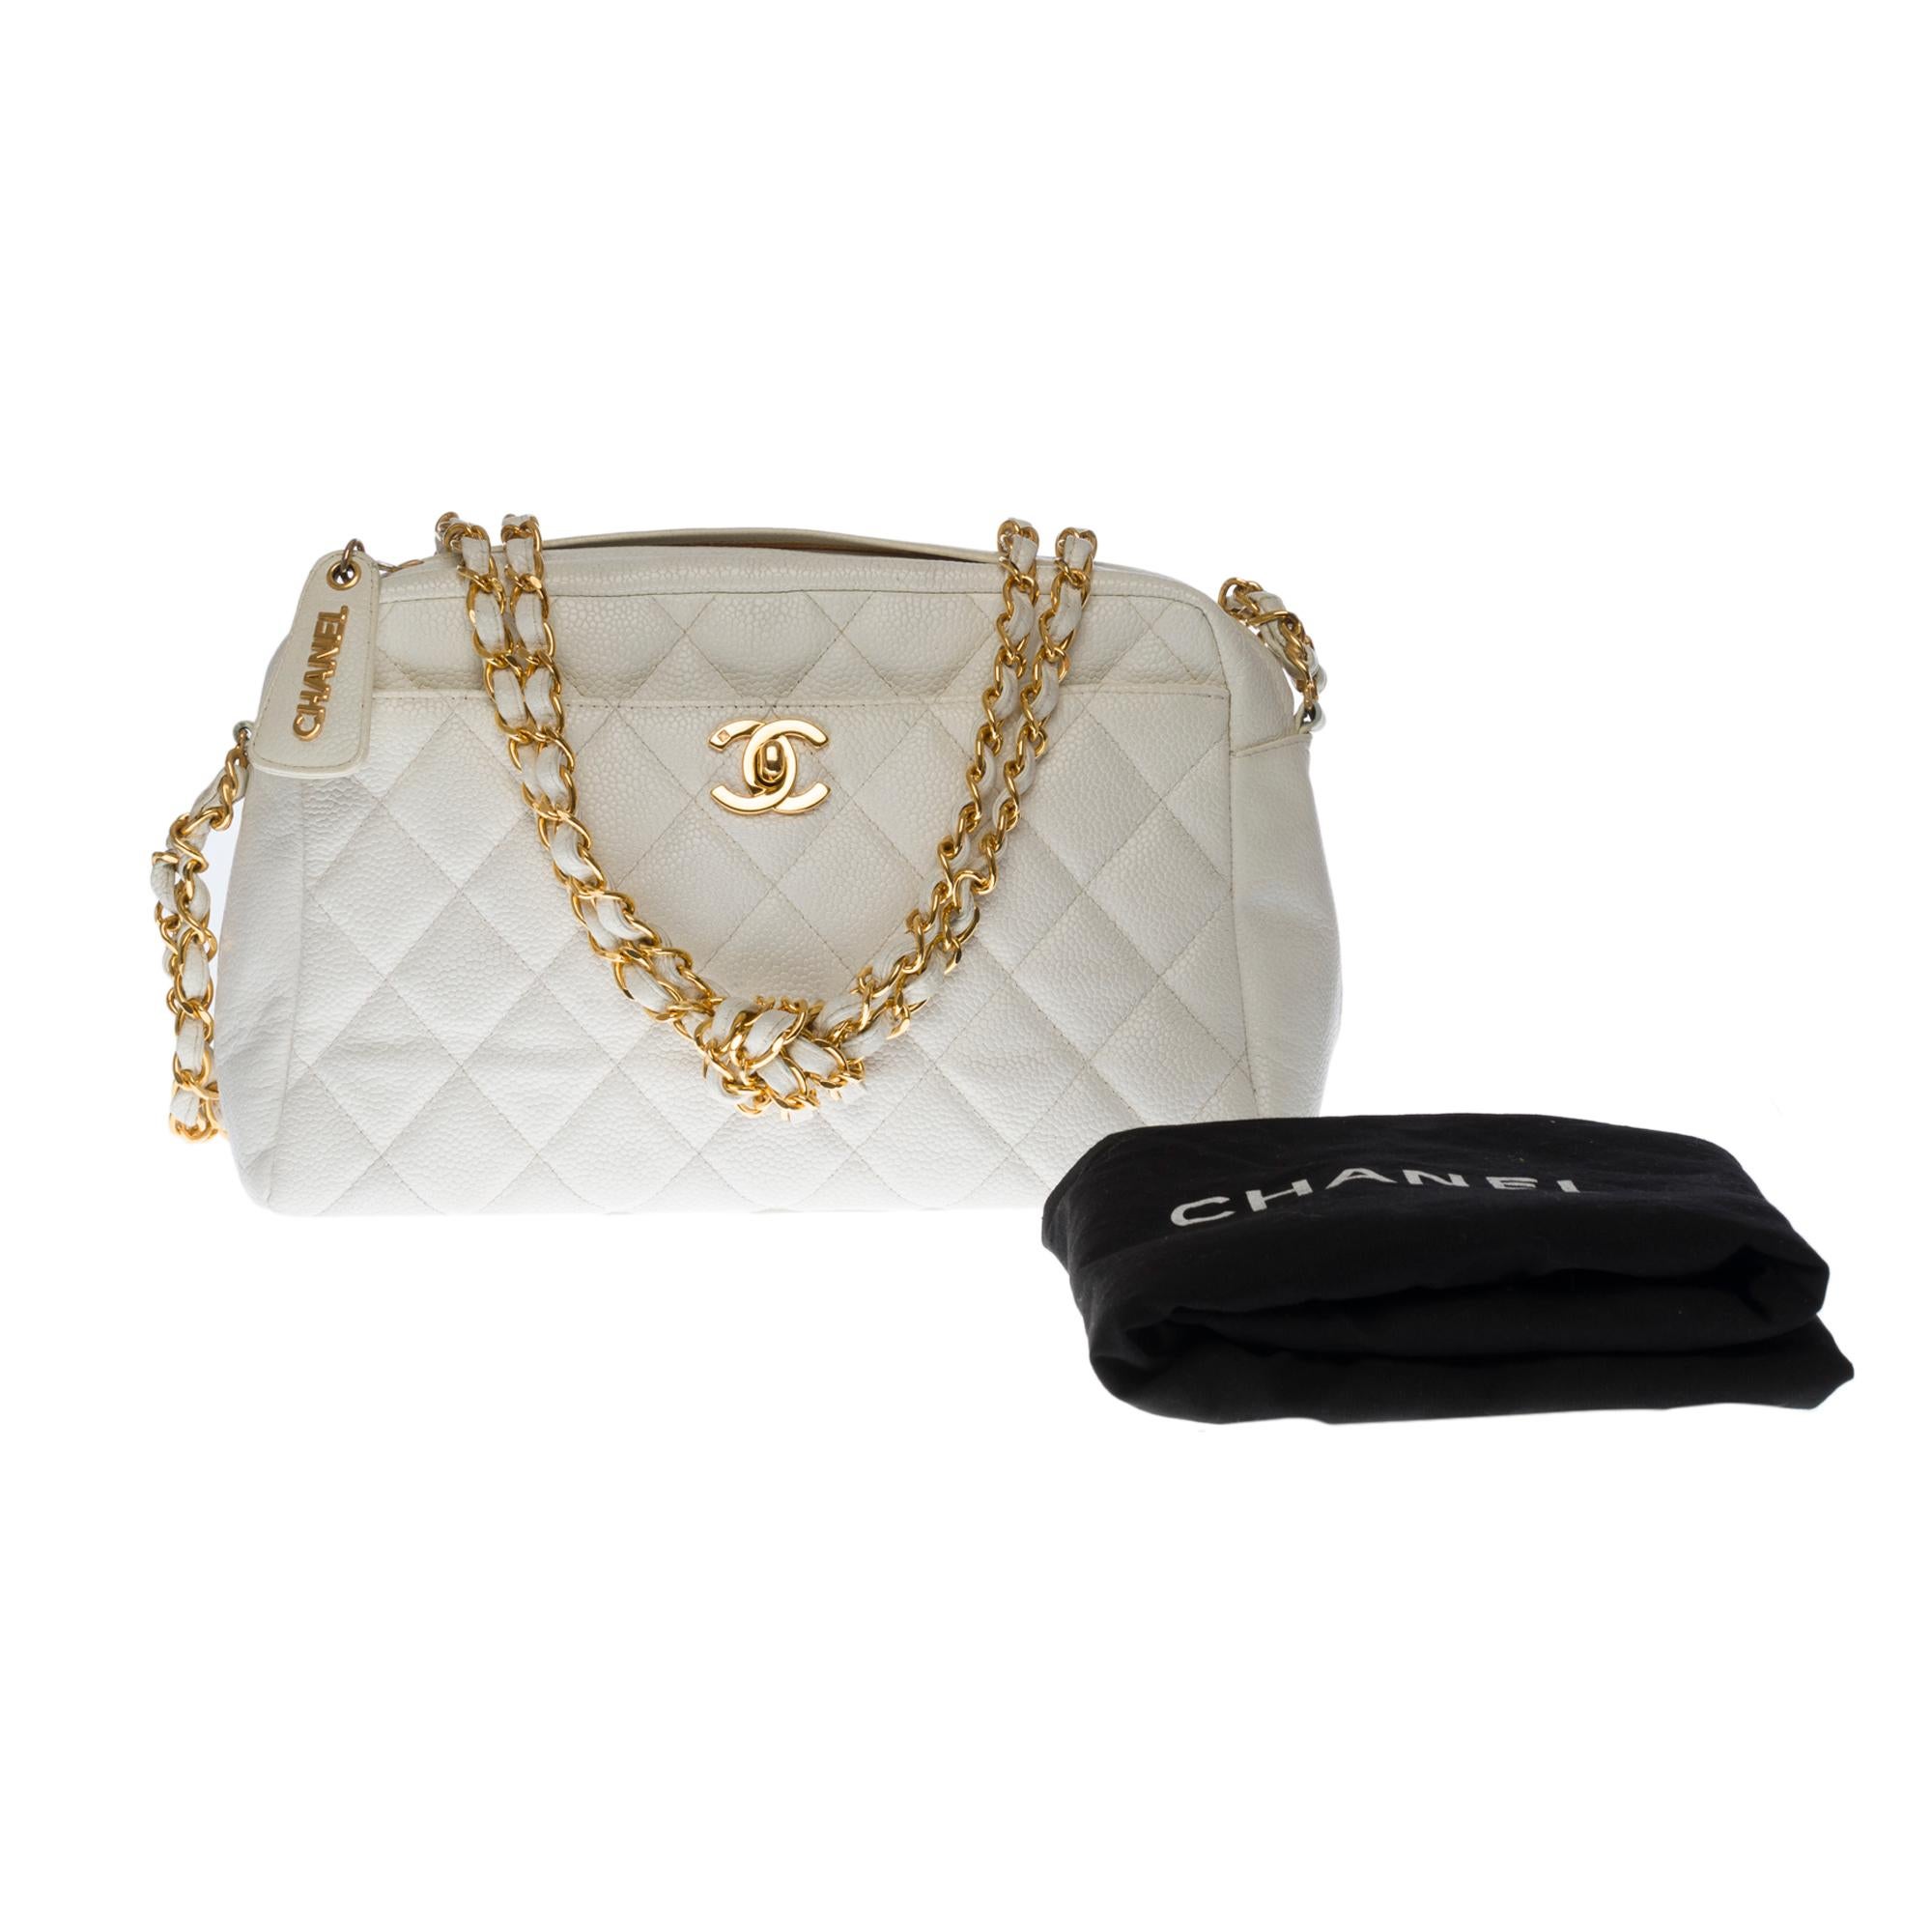 Stunning Chanel Classic shoulder bag in white caviar quilted leather, GHW 7